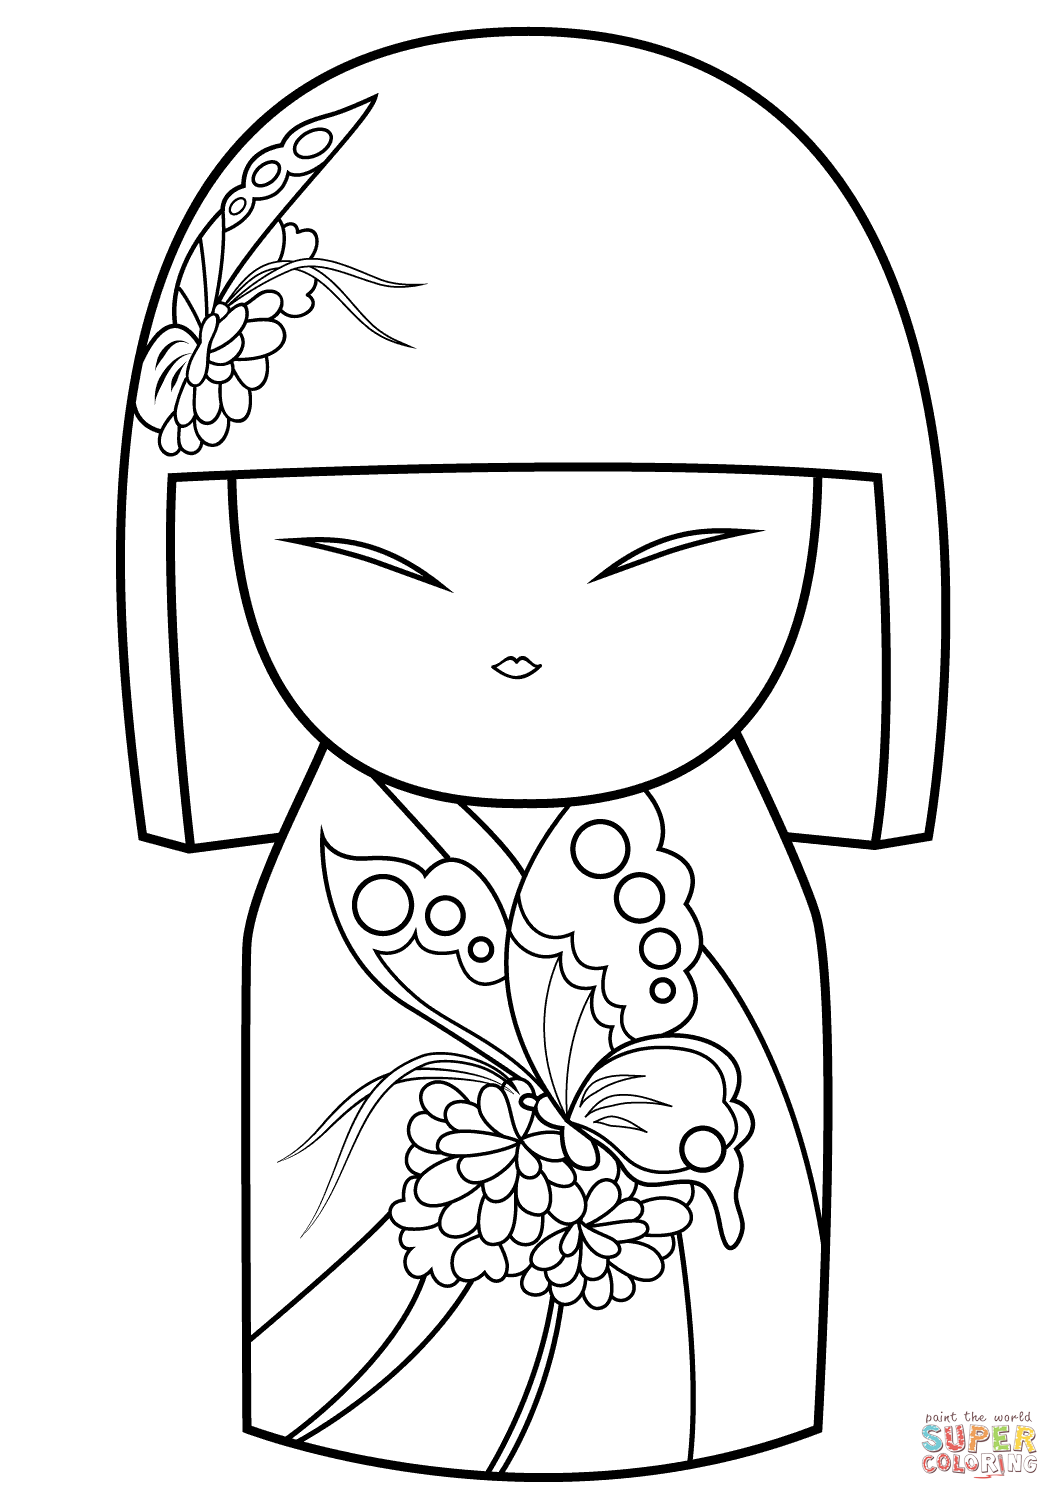 kokeshi dolls coloring pages kokeshi dolls coloring pages at getcoloringscom free kokeshi coloring pages dolls 